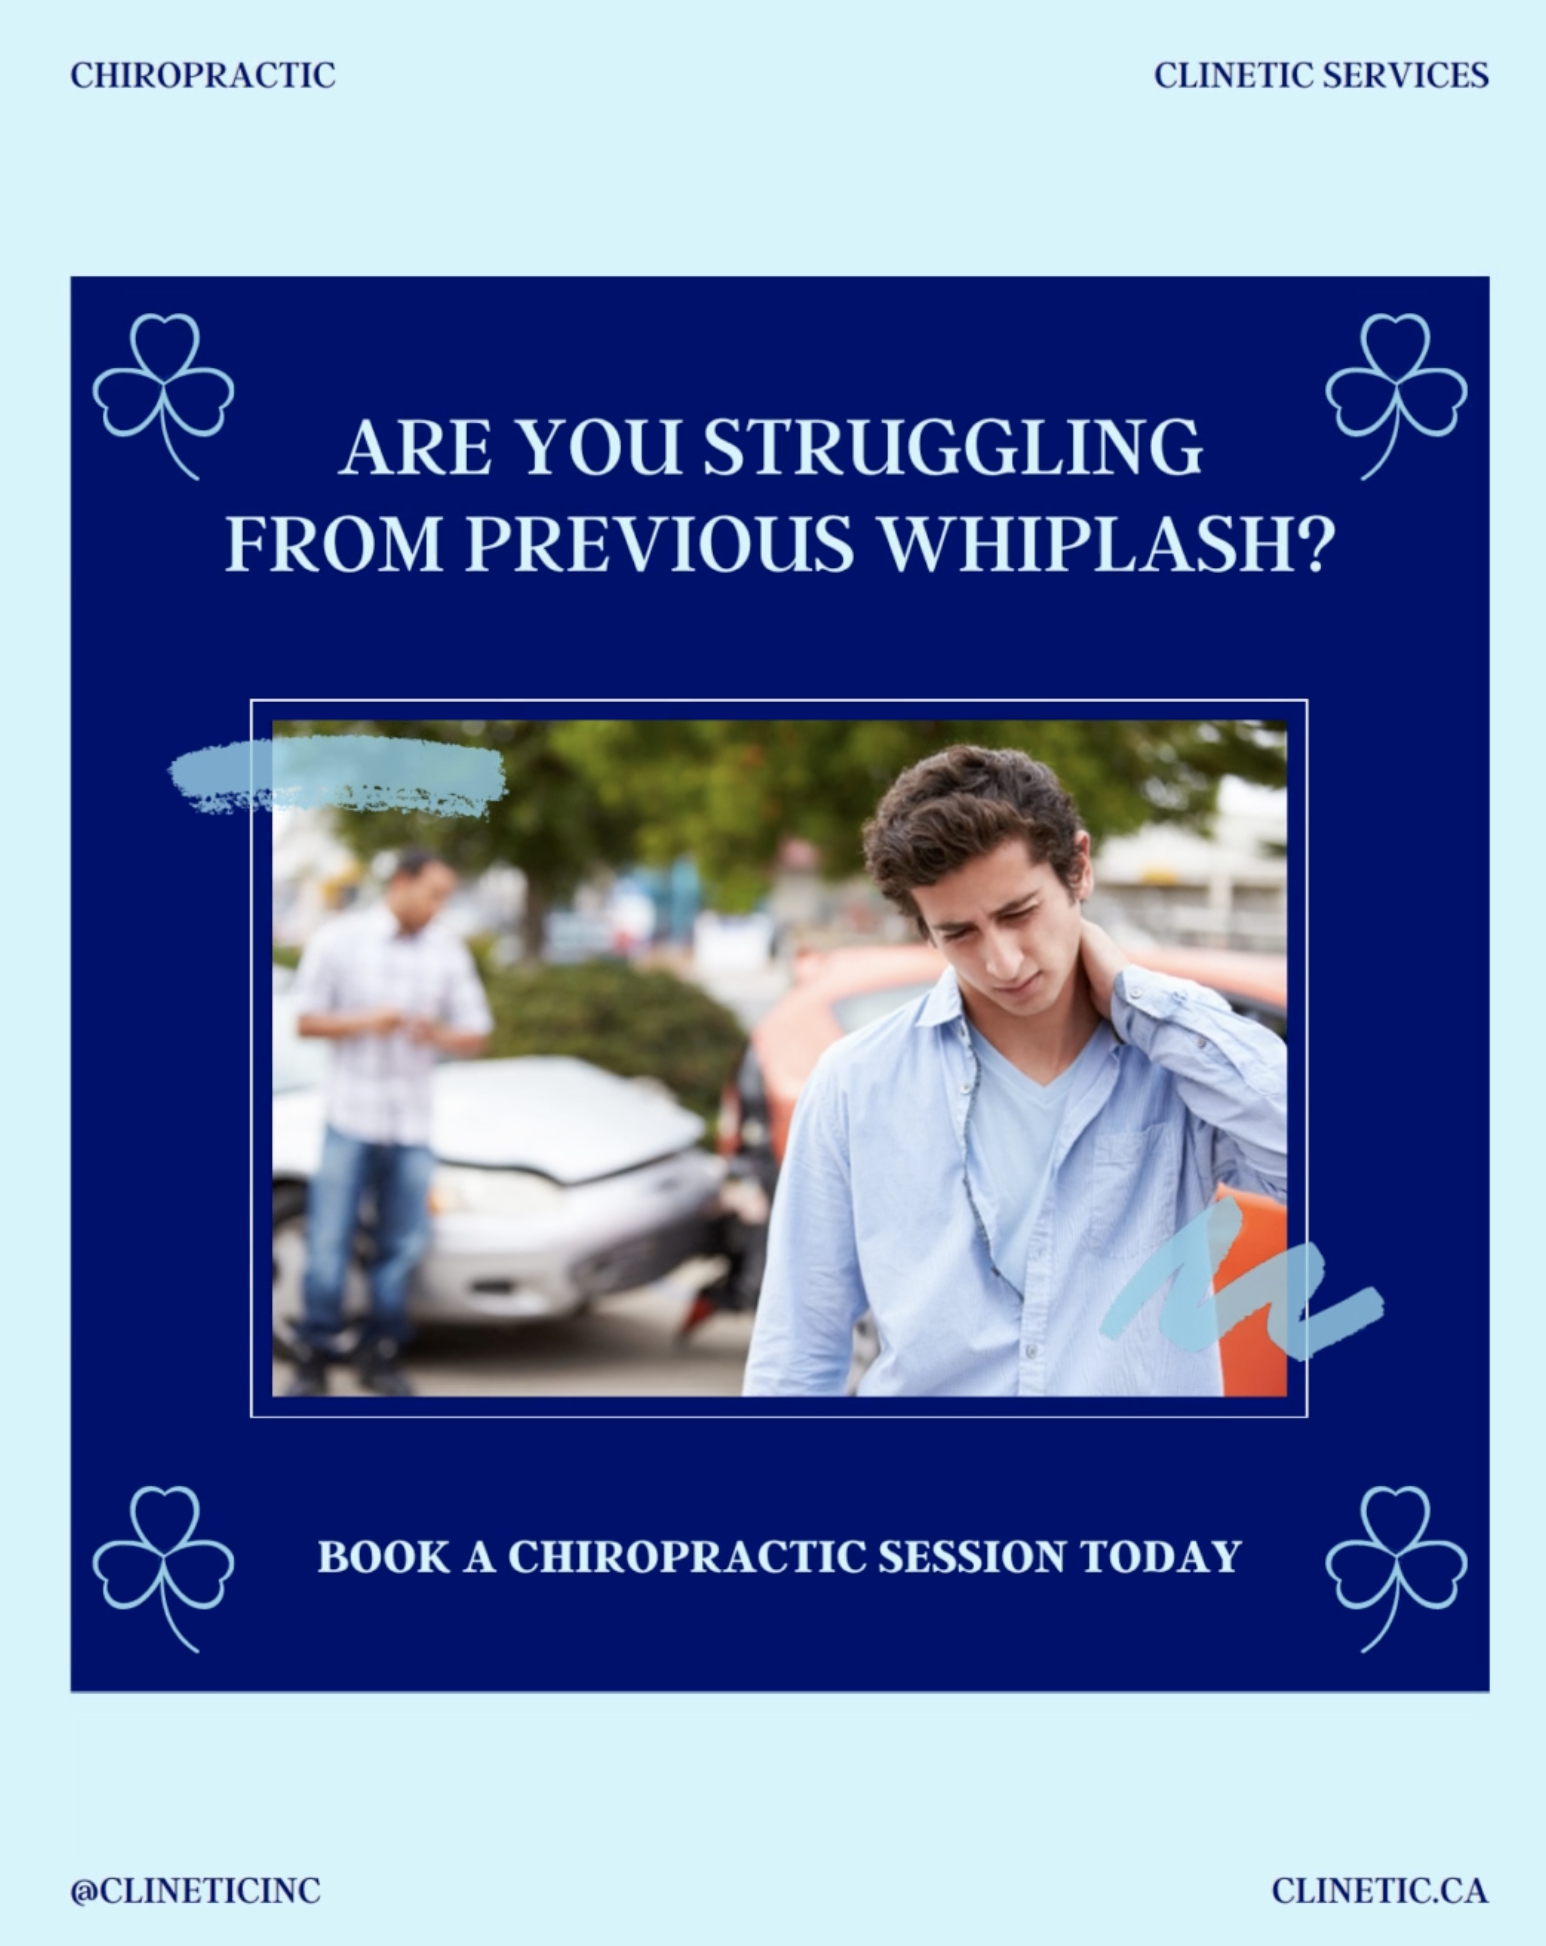 Are you struggling from previous whiplash?